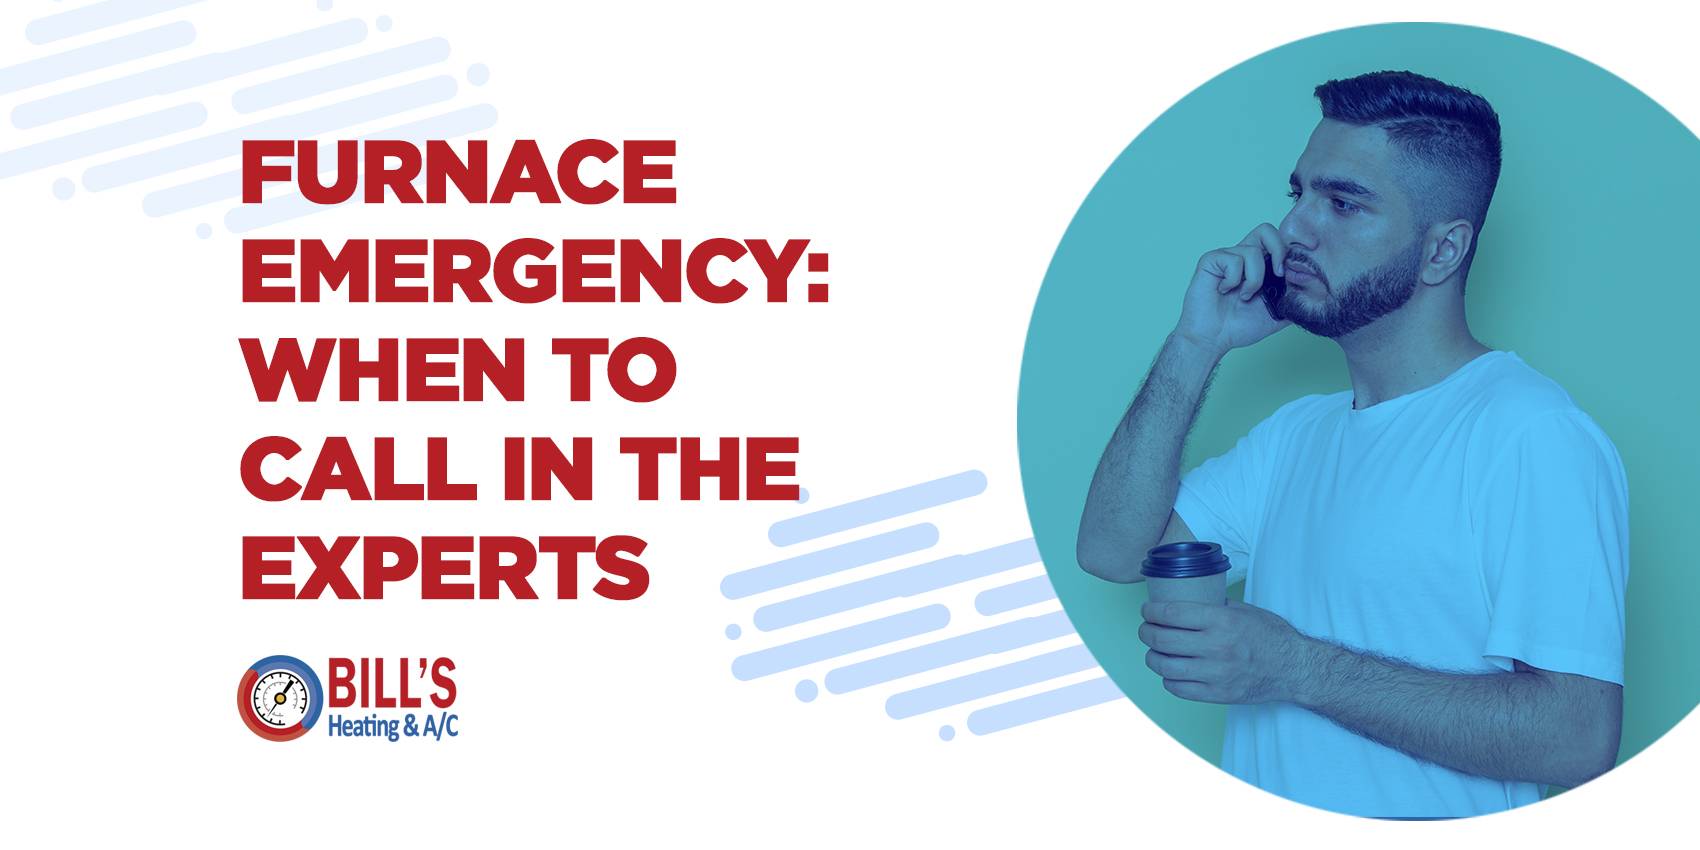 Furnace Emergency: When to Call in the Experts